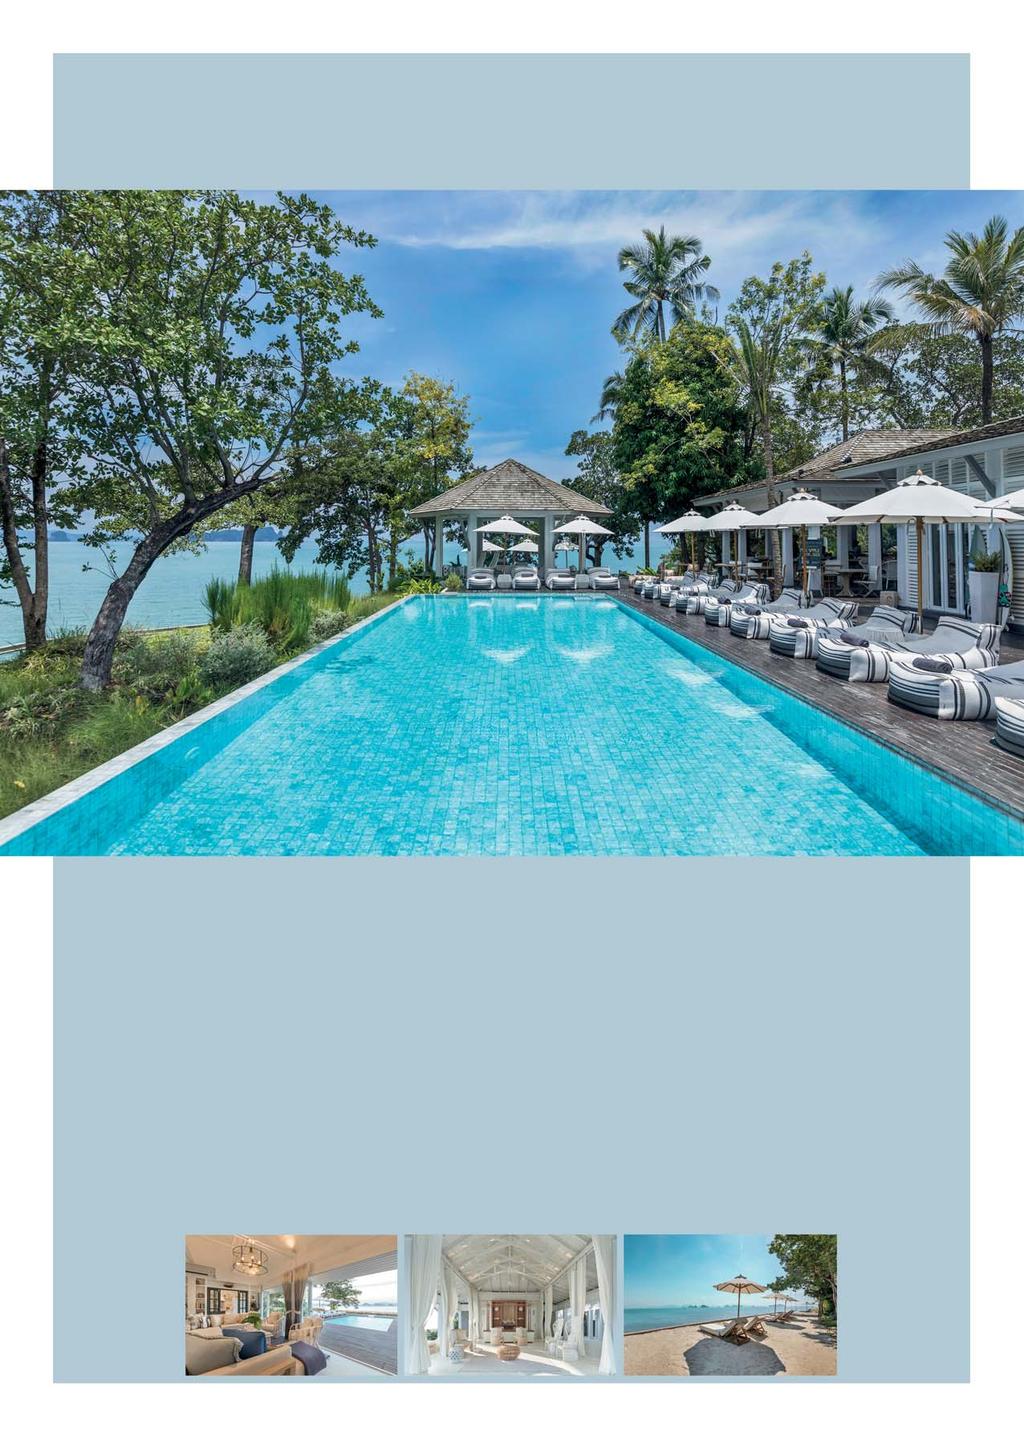 CAPE KUDU HOTEL KOH YAO NOI, THAILAND Swimming Pool SHEER ELEGANCE IN THE COSY EMBRACE OF KOH YAO NOI The Cape Kudu Hotel, Koh Yao Noi is an intimate boutique hotel belonging to the prestigious Cape